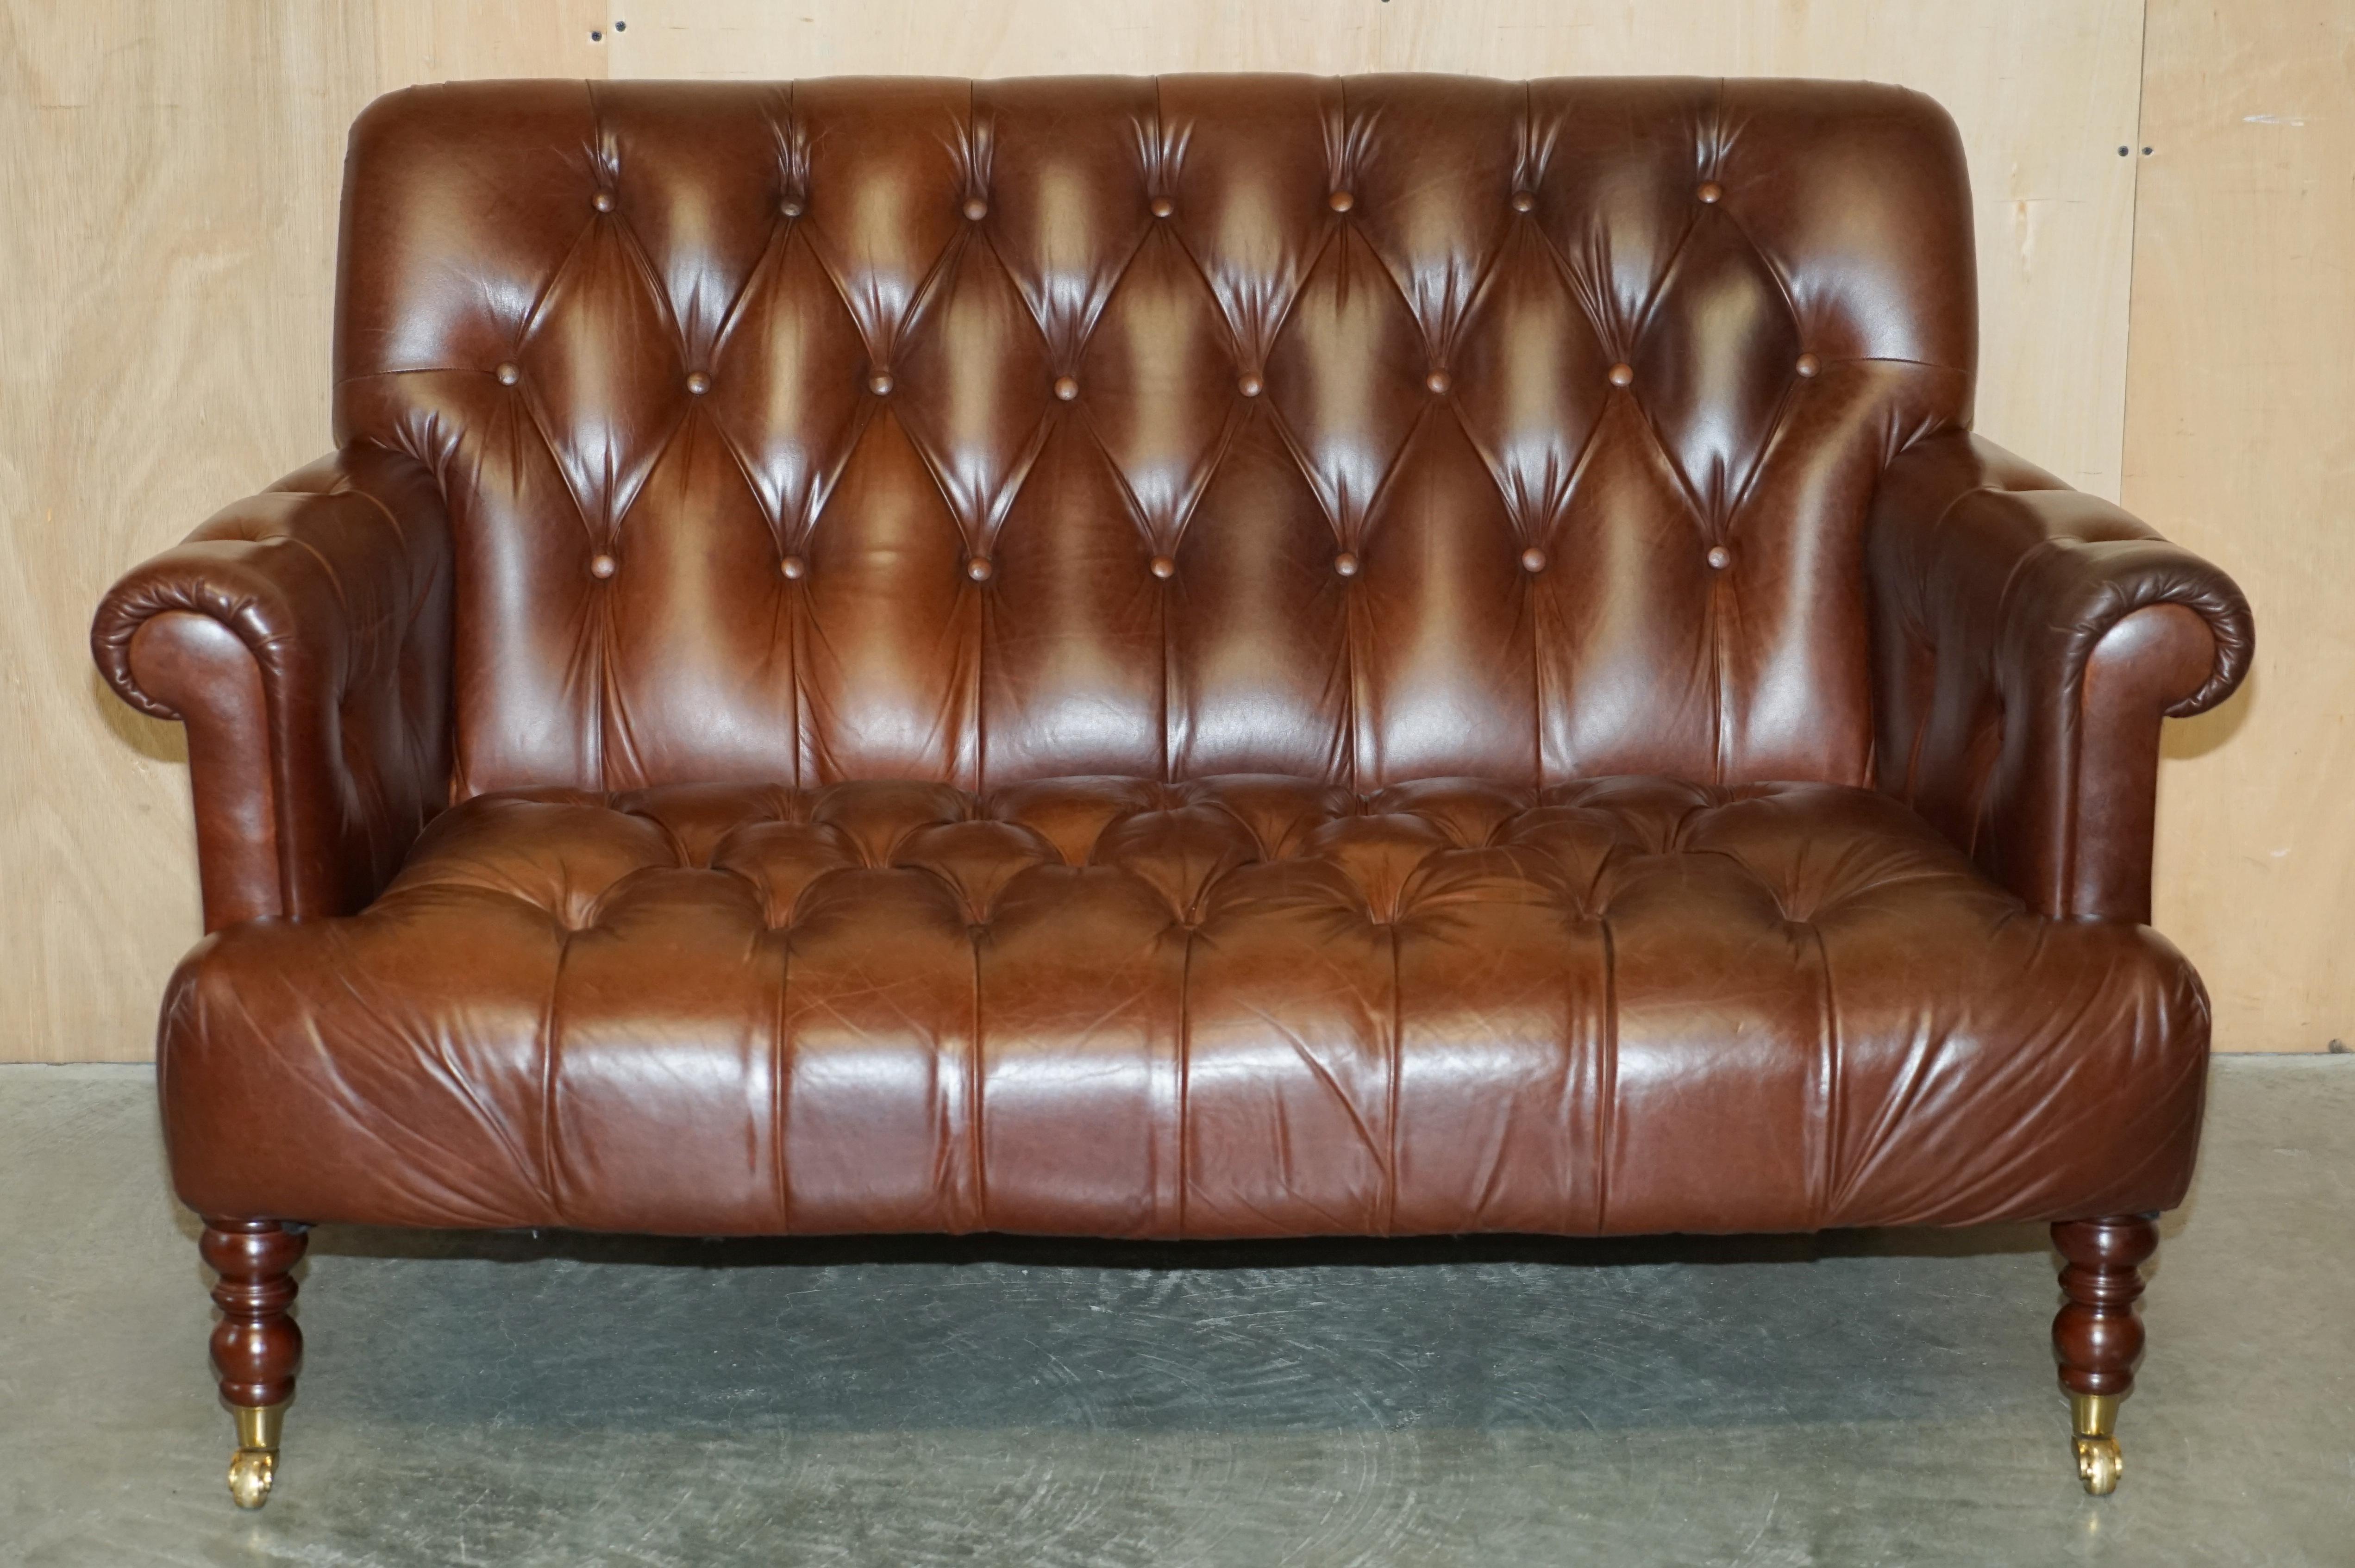 Royal House Antiques

Royal House Antiques is delighted to offer for sale this very elegant Laura Ashley Chestnut brown leather Library sofa which is Chesterfield tufted all over

Please note the delivery fee listed is just a guide, it covers within